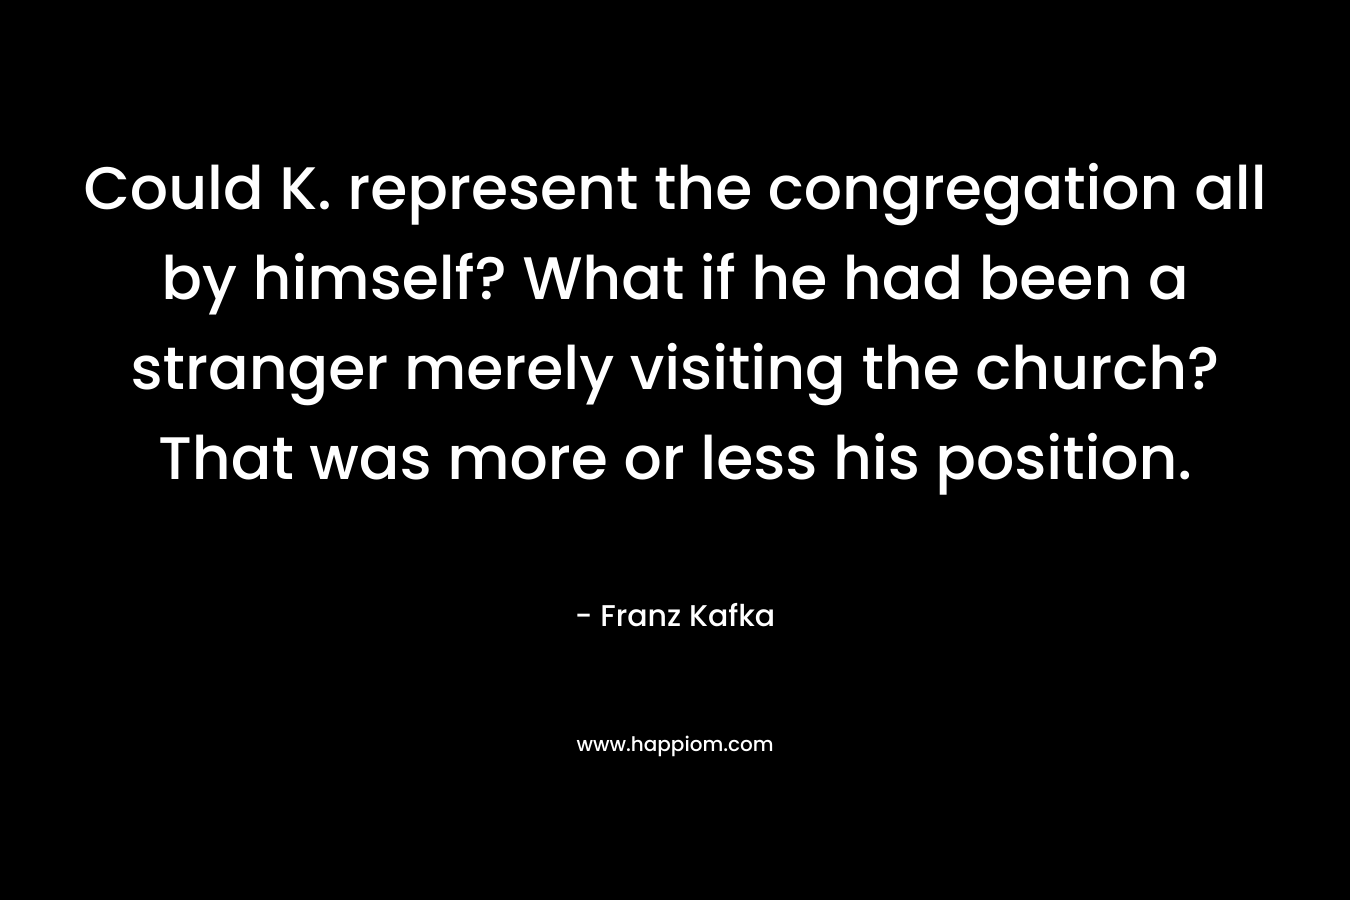 Could K. represent the congregation all by himself? What if he had been a stranger merely visiting the church? That was more or less his position. – Franz Kafka